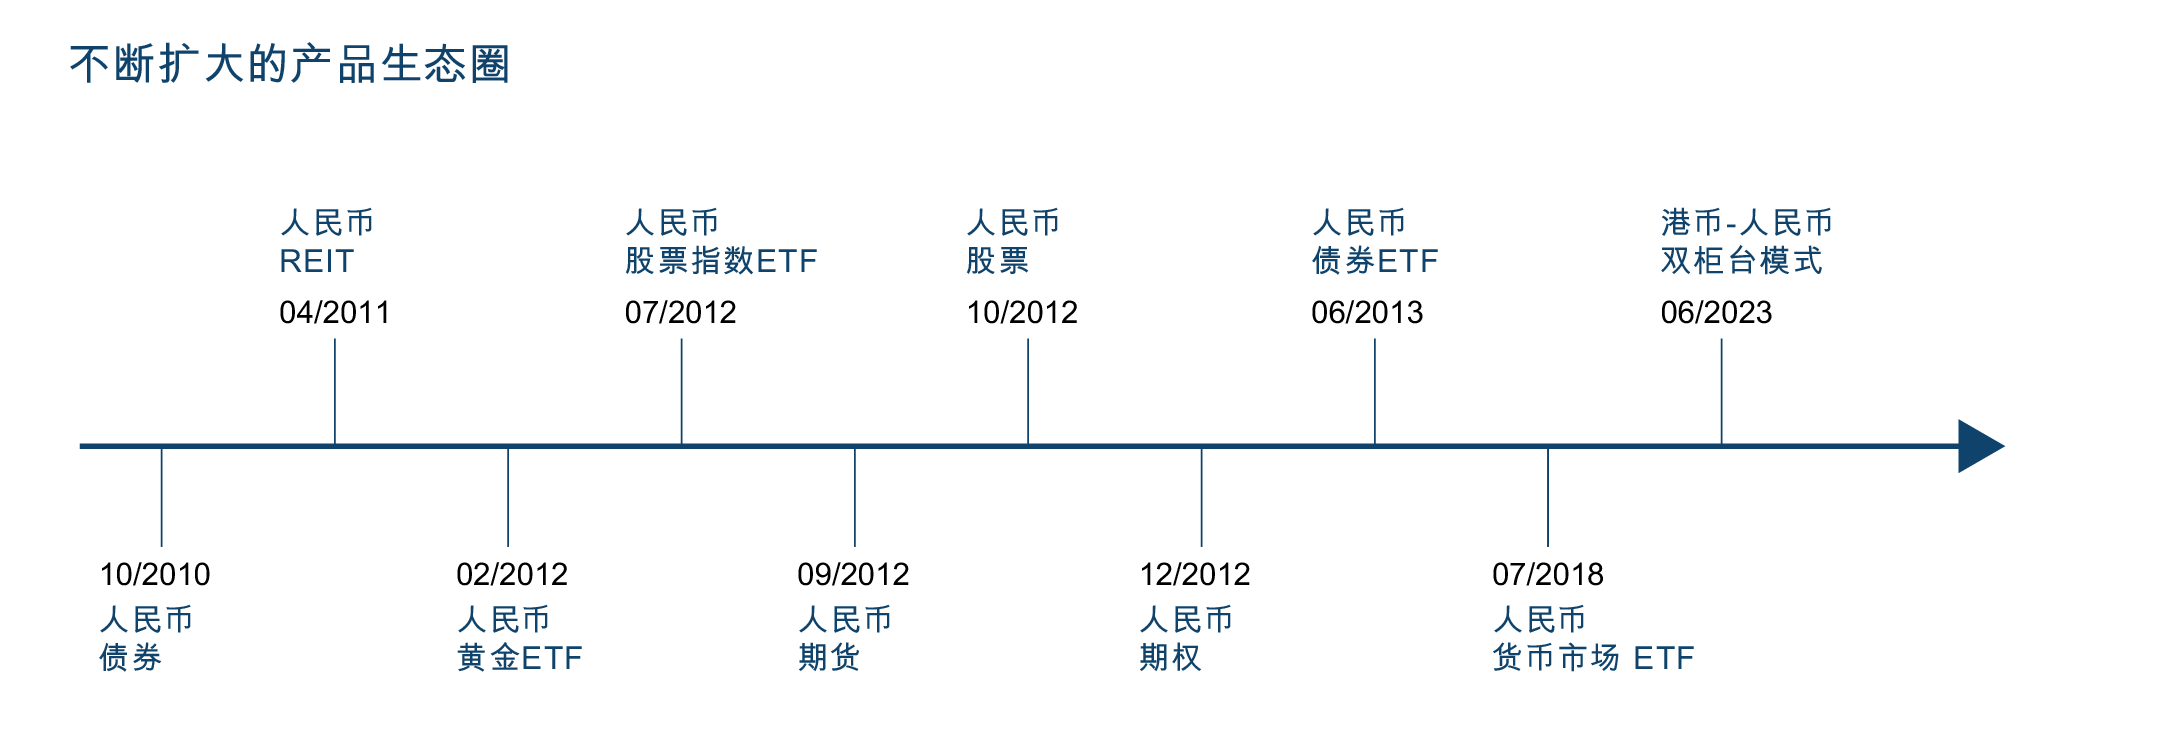 Timeline showing the growth of HKEX's offshore RMB product ecosystem between October 2010 and June 2023